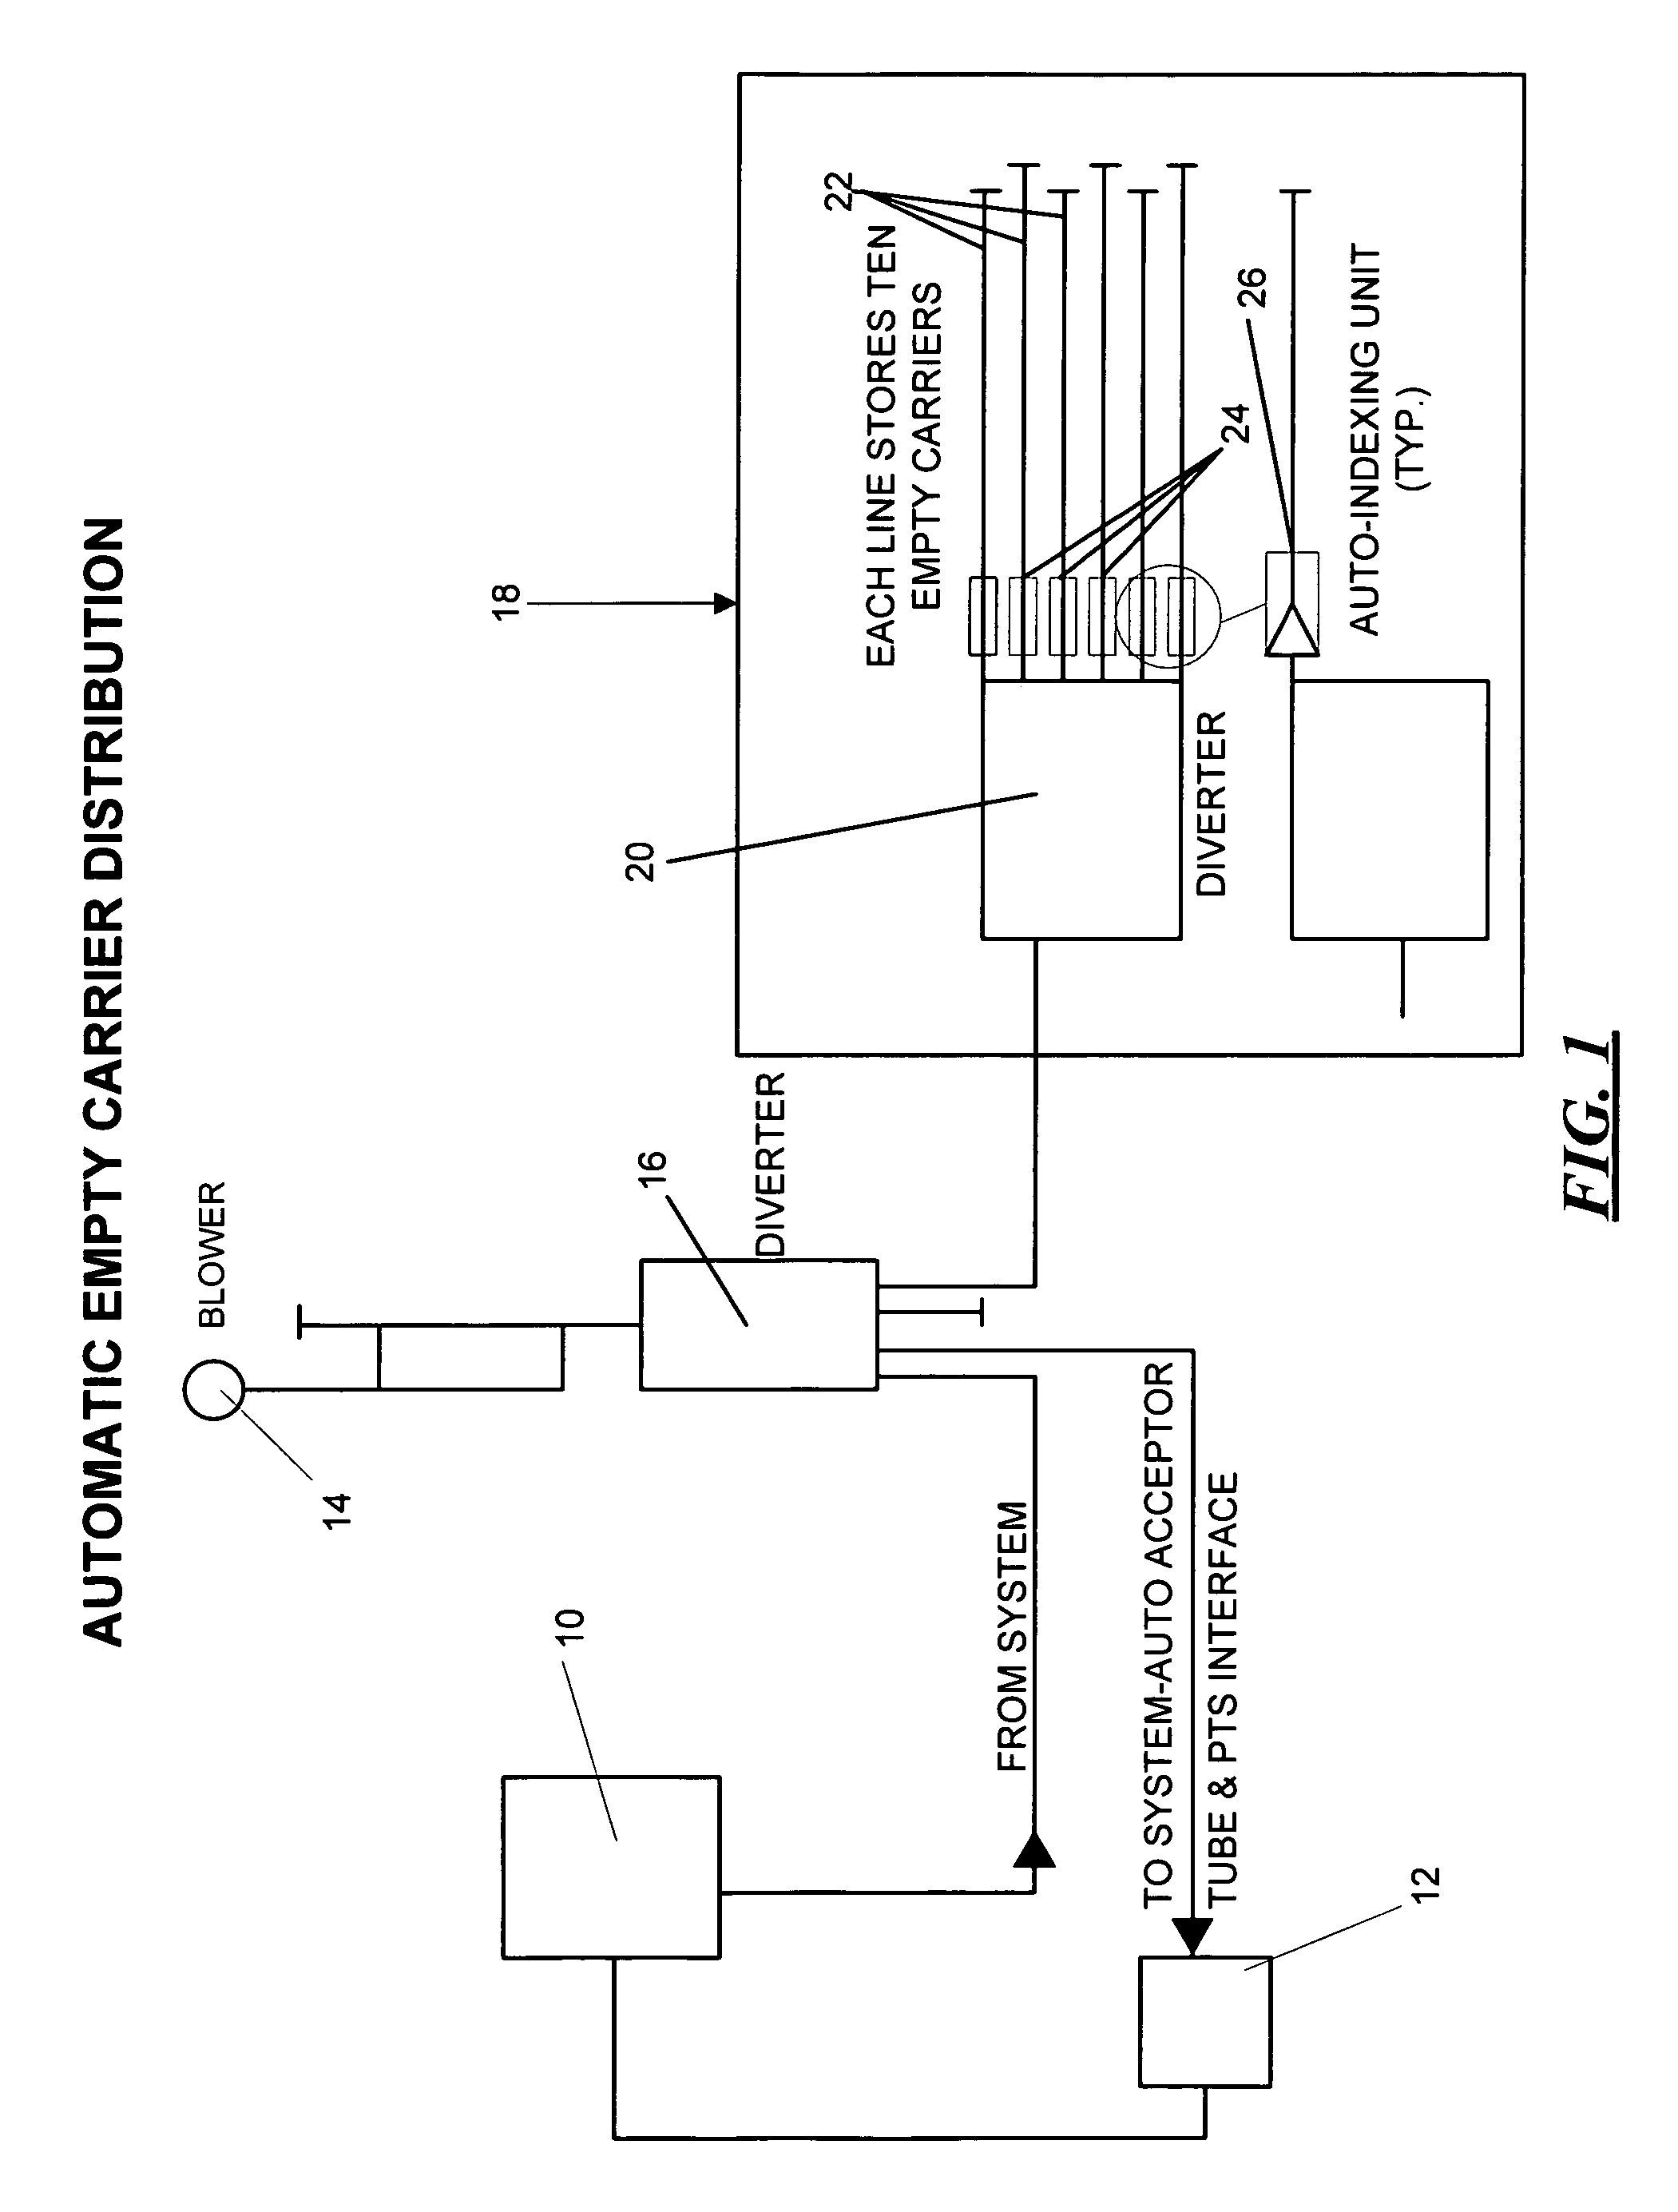 Automatic empty carrier storage, retrieval and distribution system